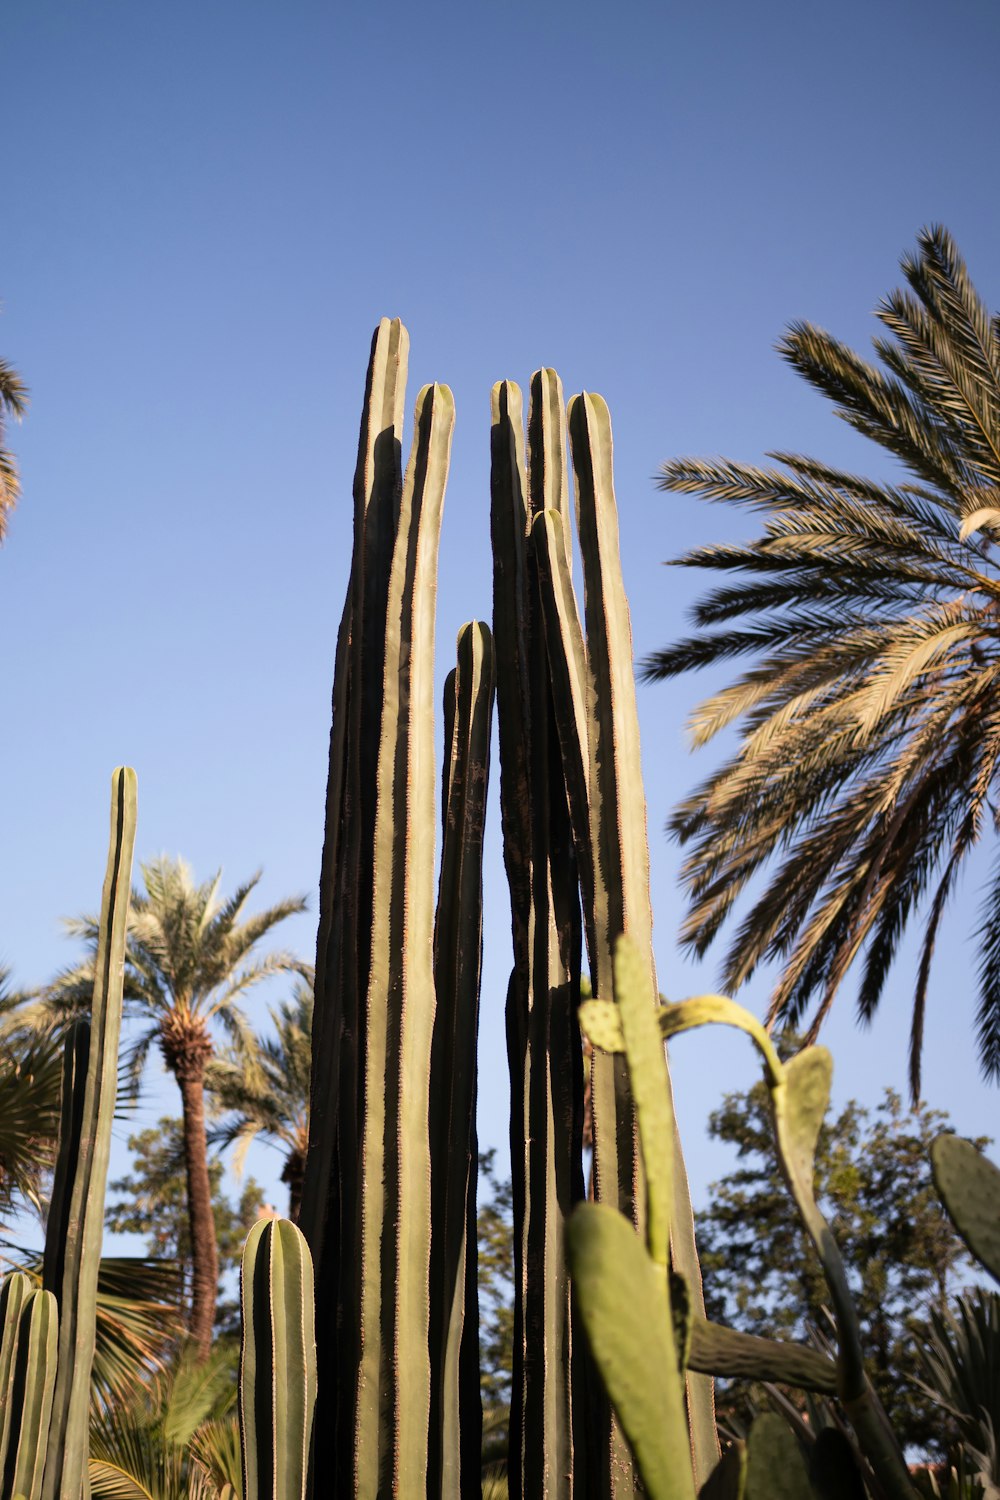 a tall cactus plant in front of palm trees